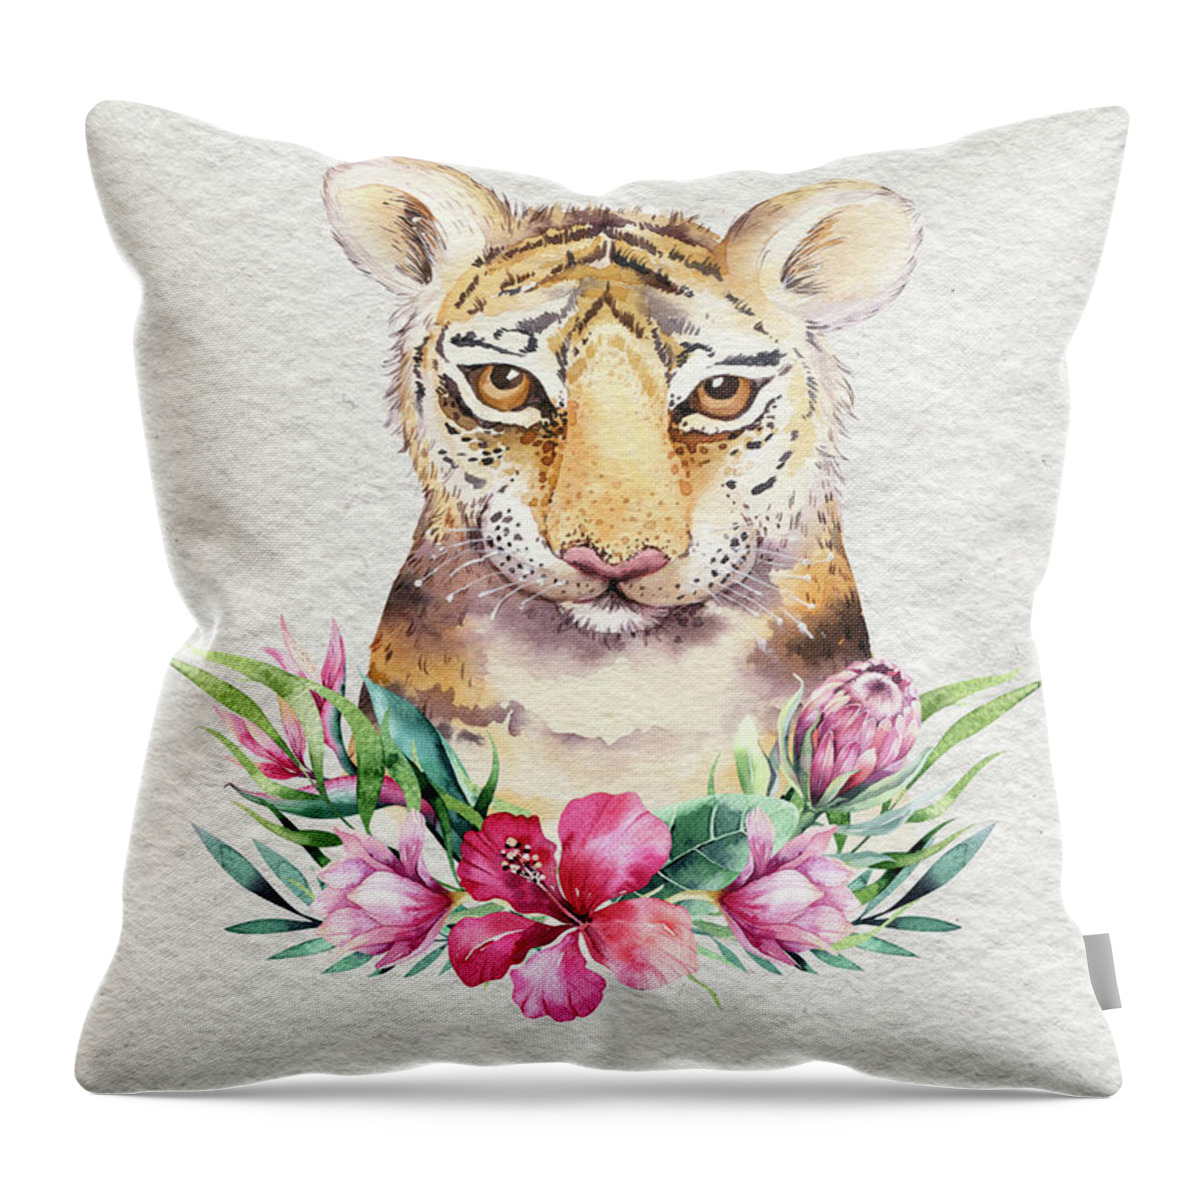 Tiger With Flowers Throw Pillow featuring the painting Tiger With Flowers by Nursery Art